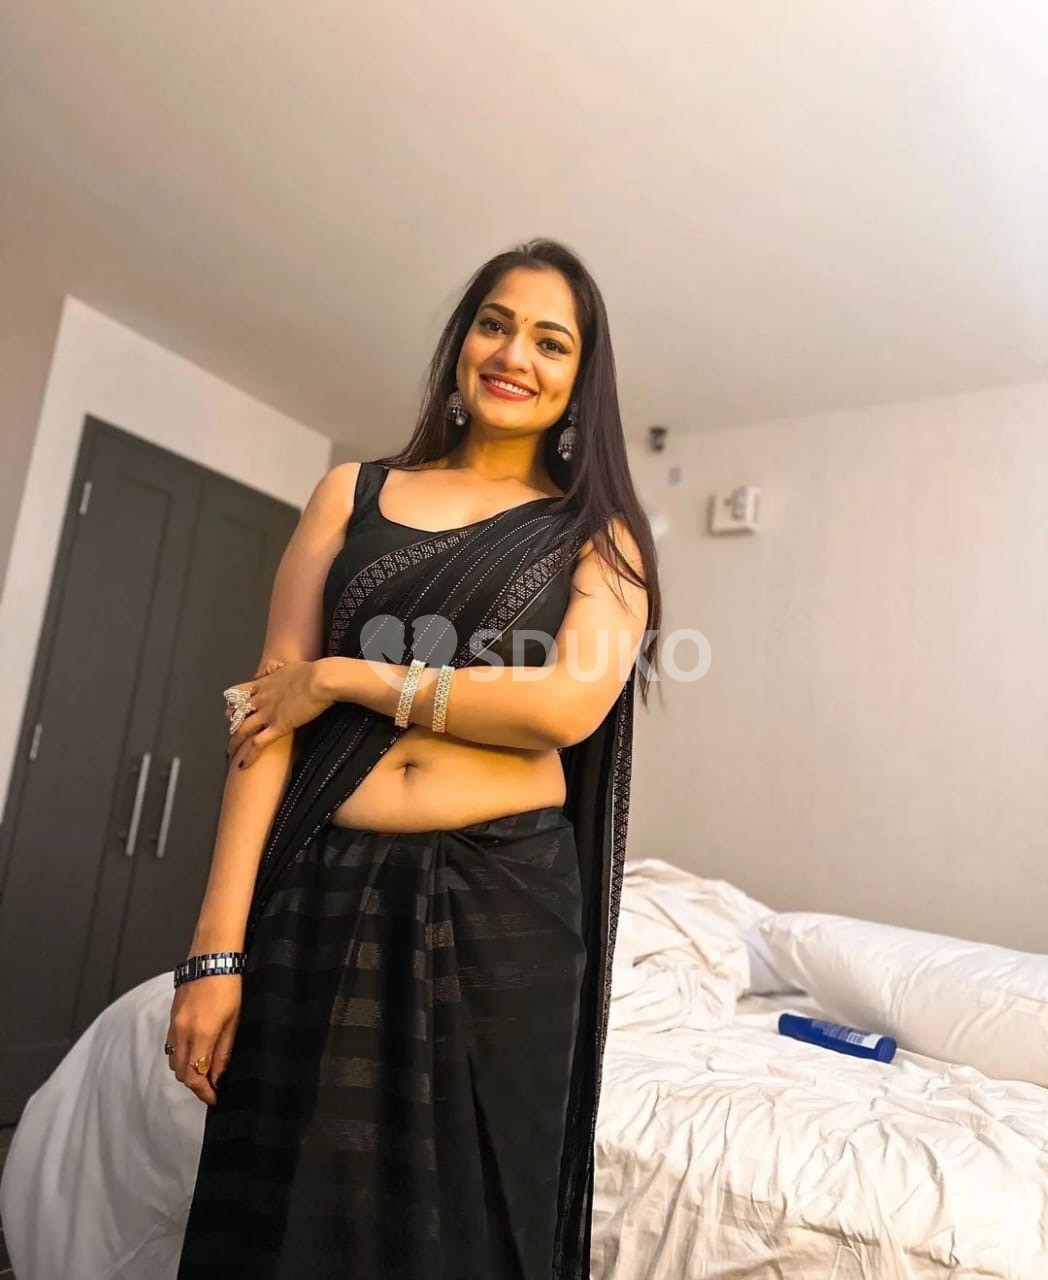 "MY SELF Riya Sharma @UNLIMITED SEX CUTE BEST SERVICE AND SAFE AND ,, SECURED SECURE AND"GENUINE